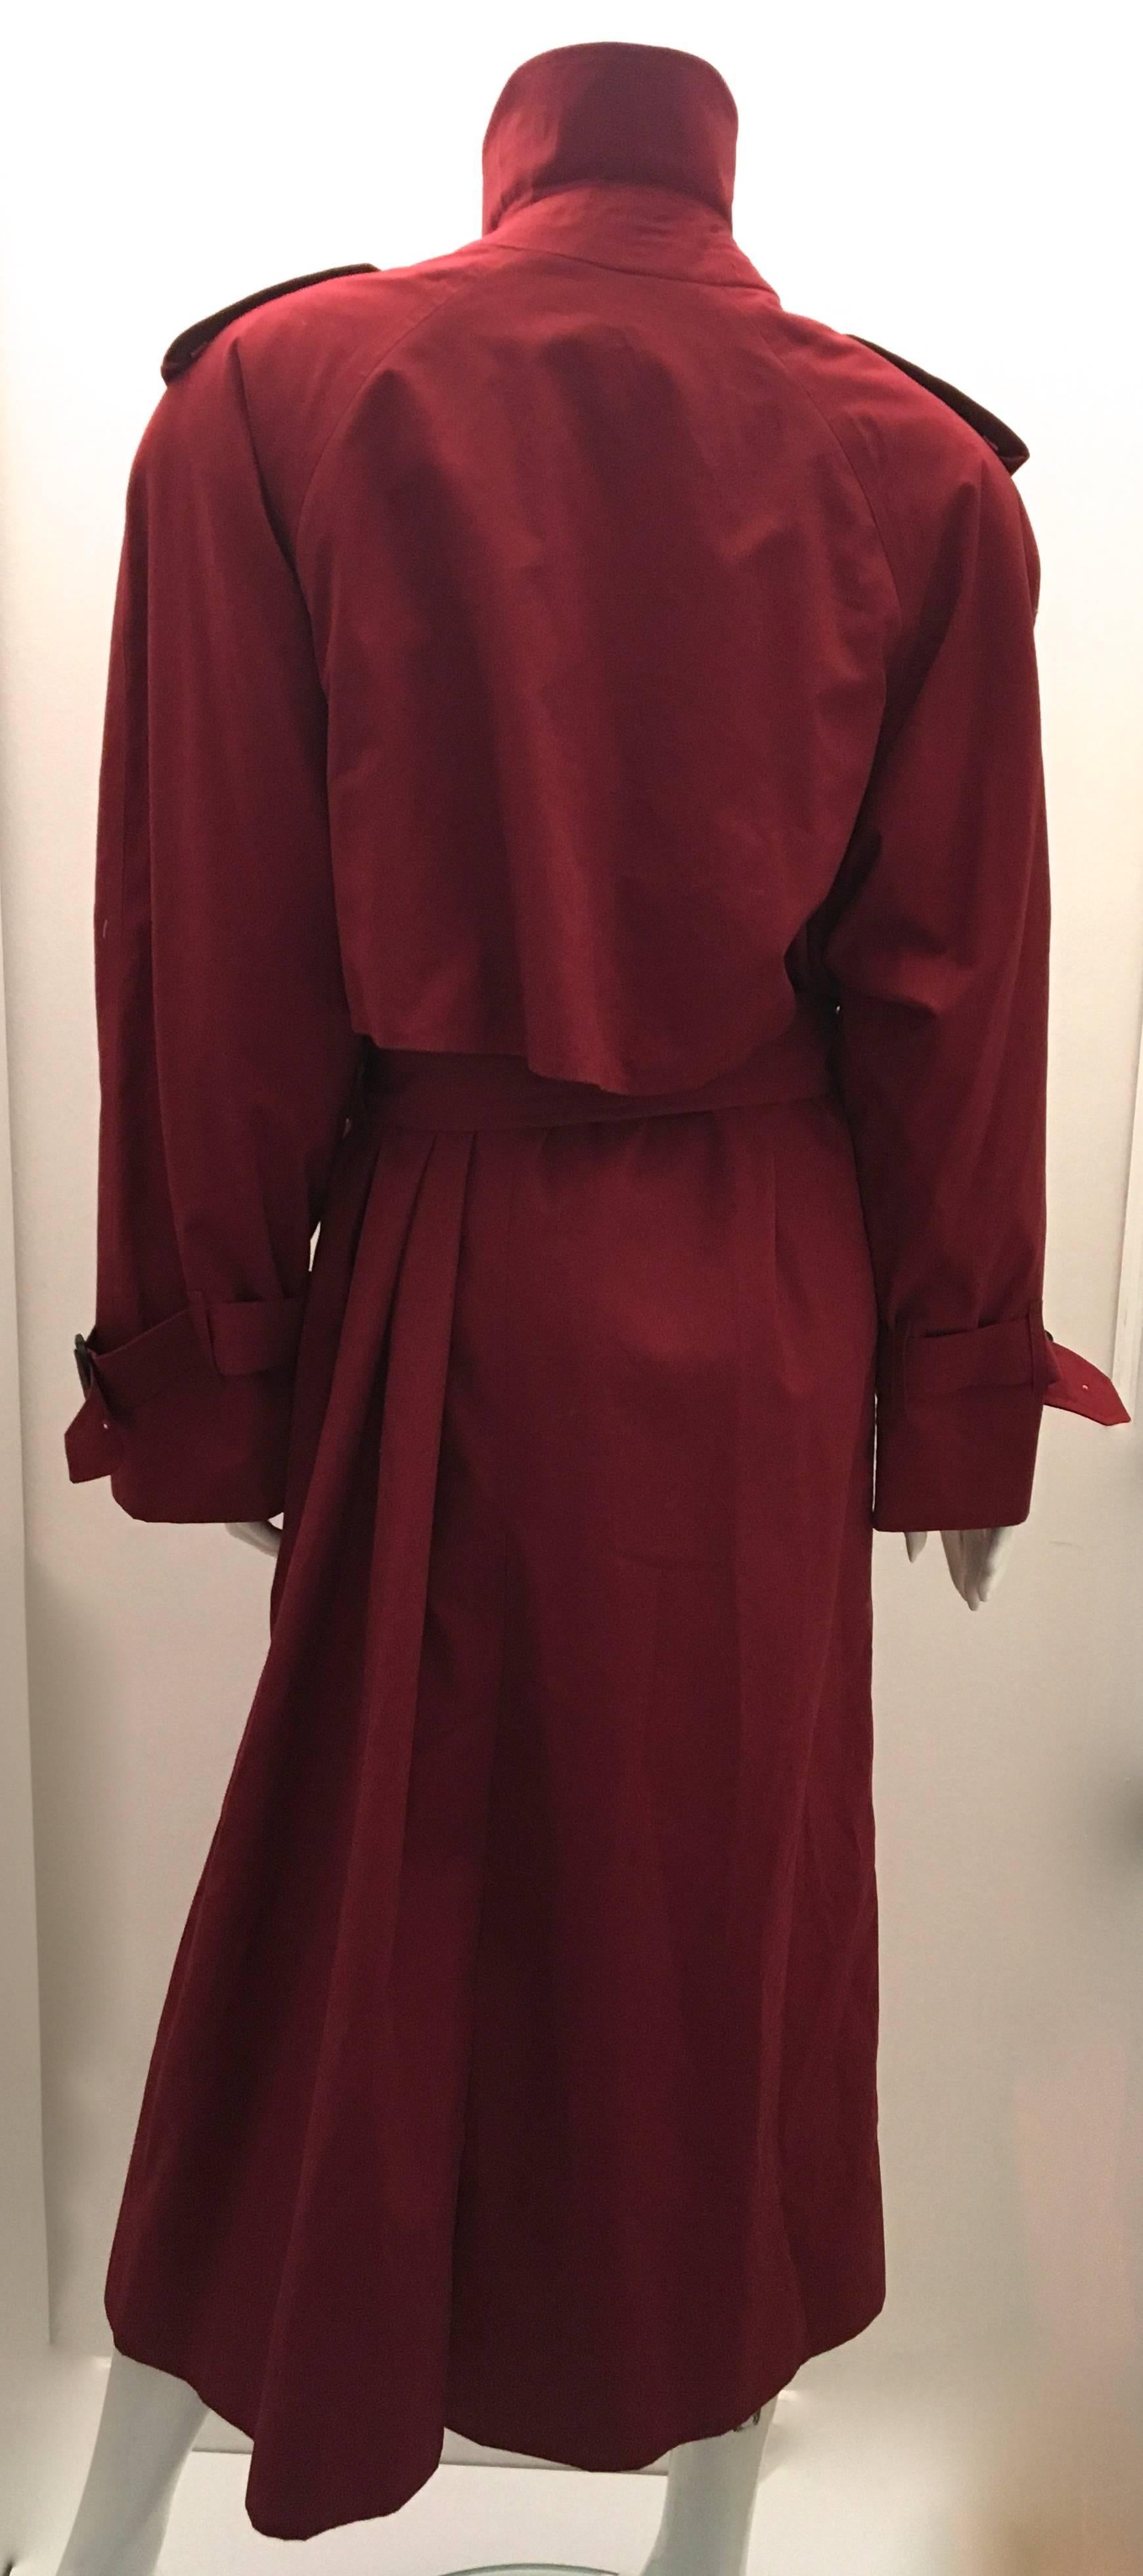 Presented here is a magnificent raincoat from Burberrys. The coat is made from 100% cotton and is a size 12 long. The coat is burgundy colored and is lined with the trademark Burberry pattern on the interior of the coat. The inside trademark fabric